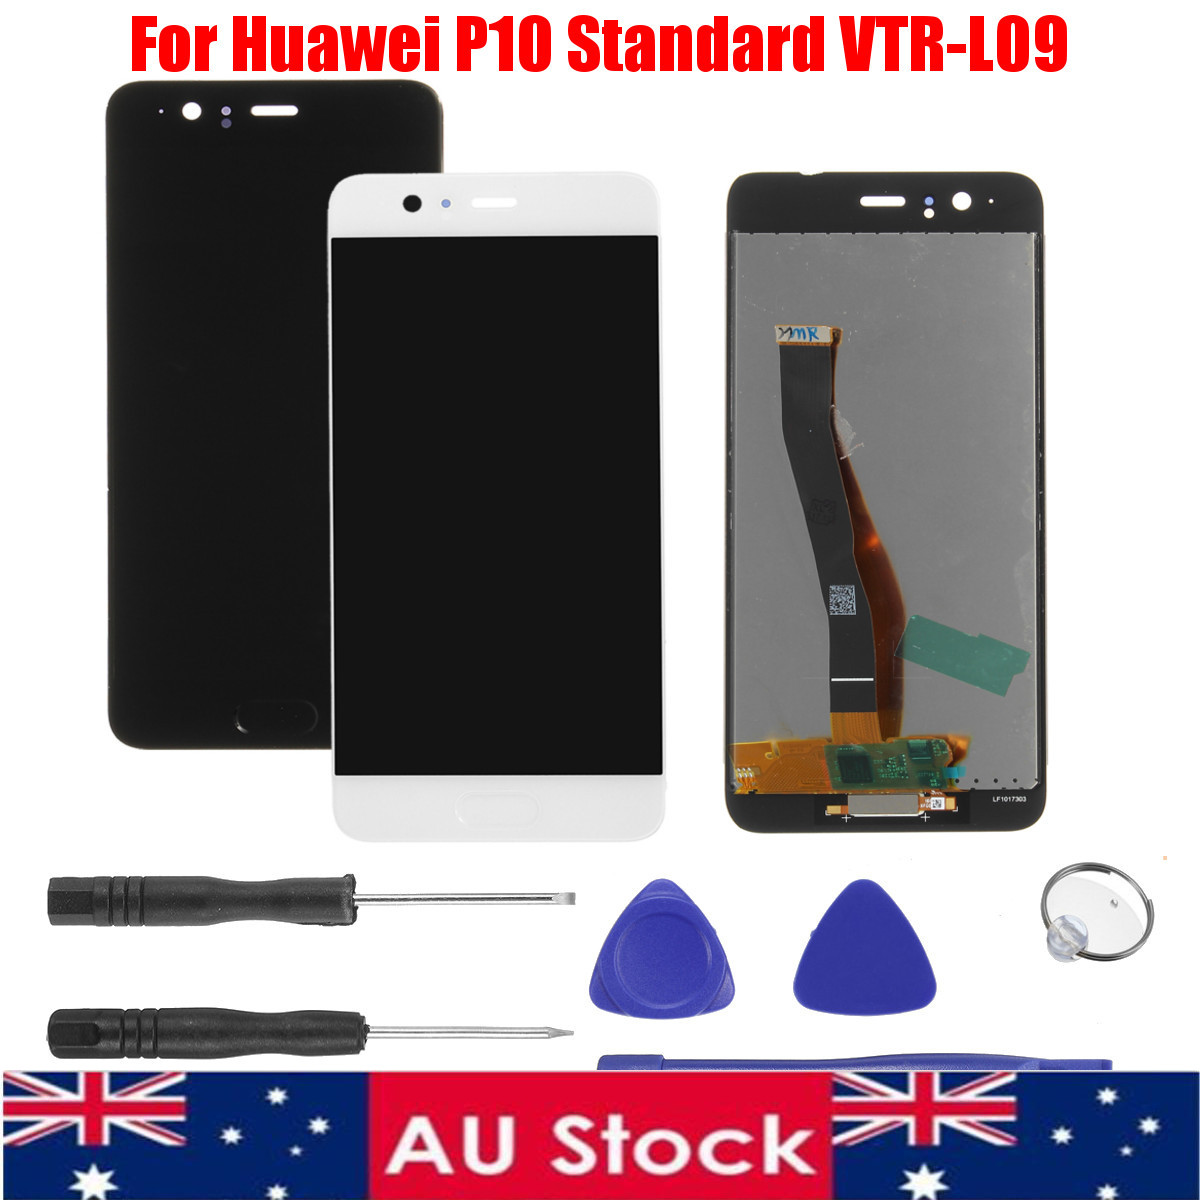 LCD-DisplayTouch-Screen-Digitizer-Assembly-Replacement-With-Tools-For-Huawei-P10-1261950